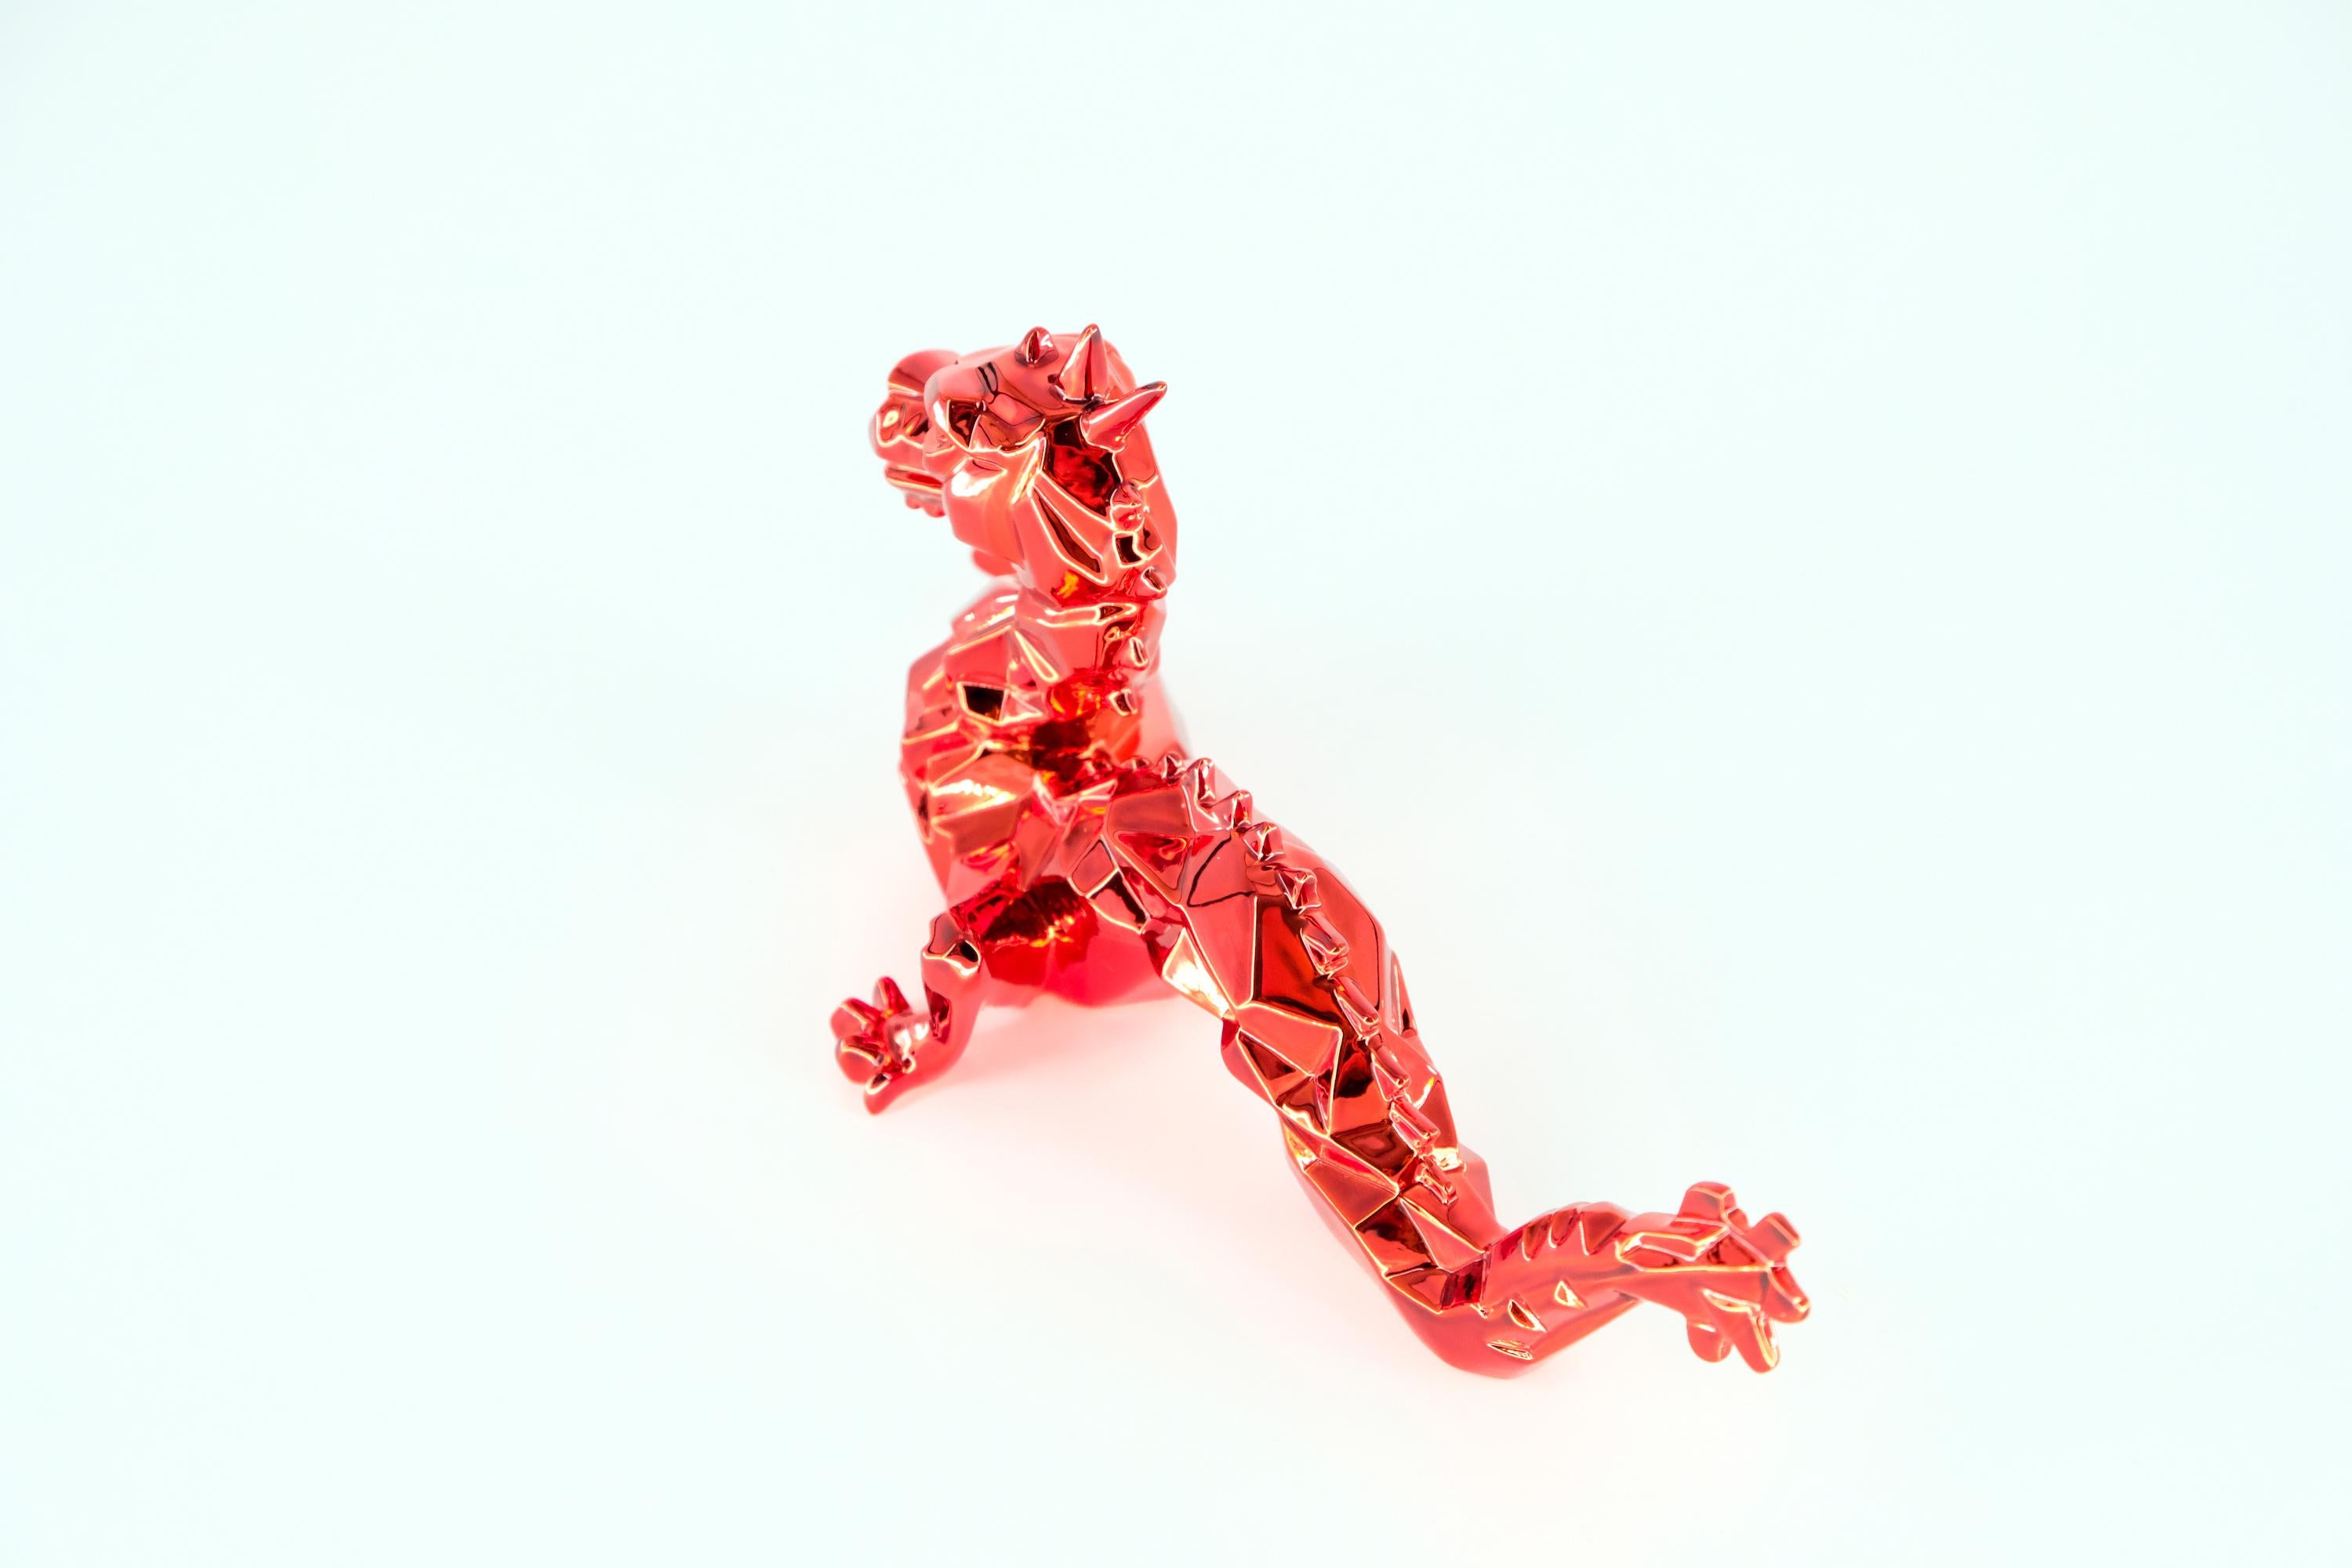 Richard ORLINSKI
Dragon Spirit (Red Edition)

Sculpture in resin
Metallic Red
About 10 x 23 x 9 cm (c. 3.9 x 9 x 3.5 in)
Presented in original box with certificate

Excellent condition